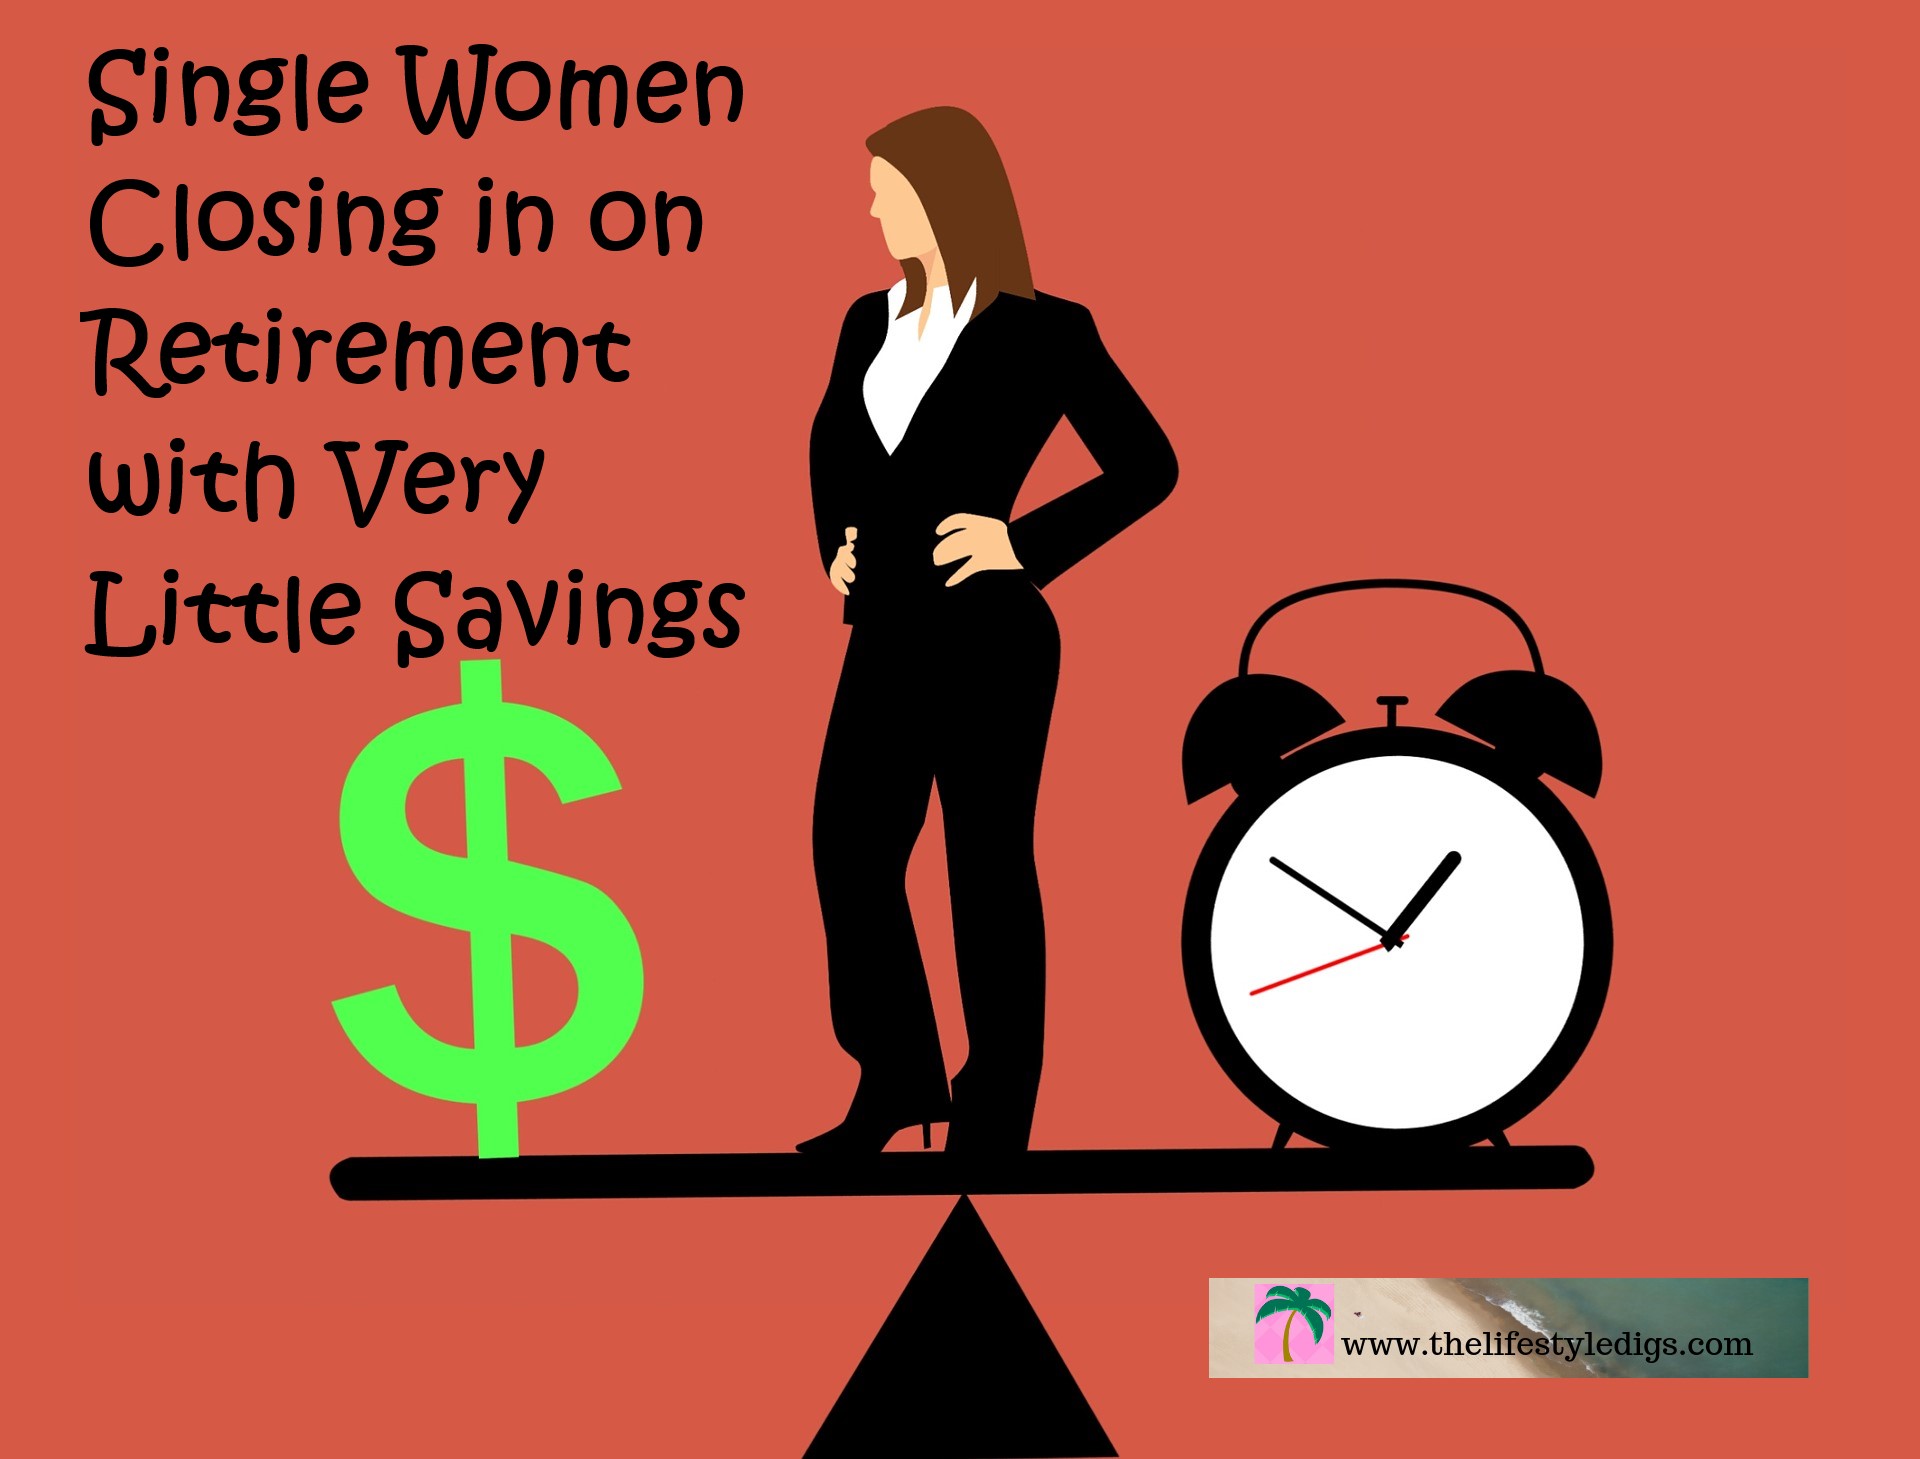 Single Women Closing in on Retirement with Very Little Savings